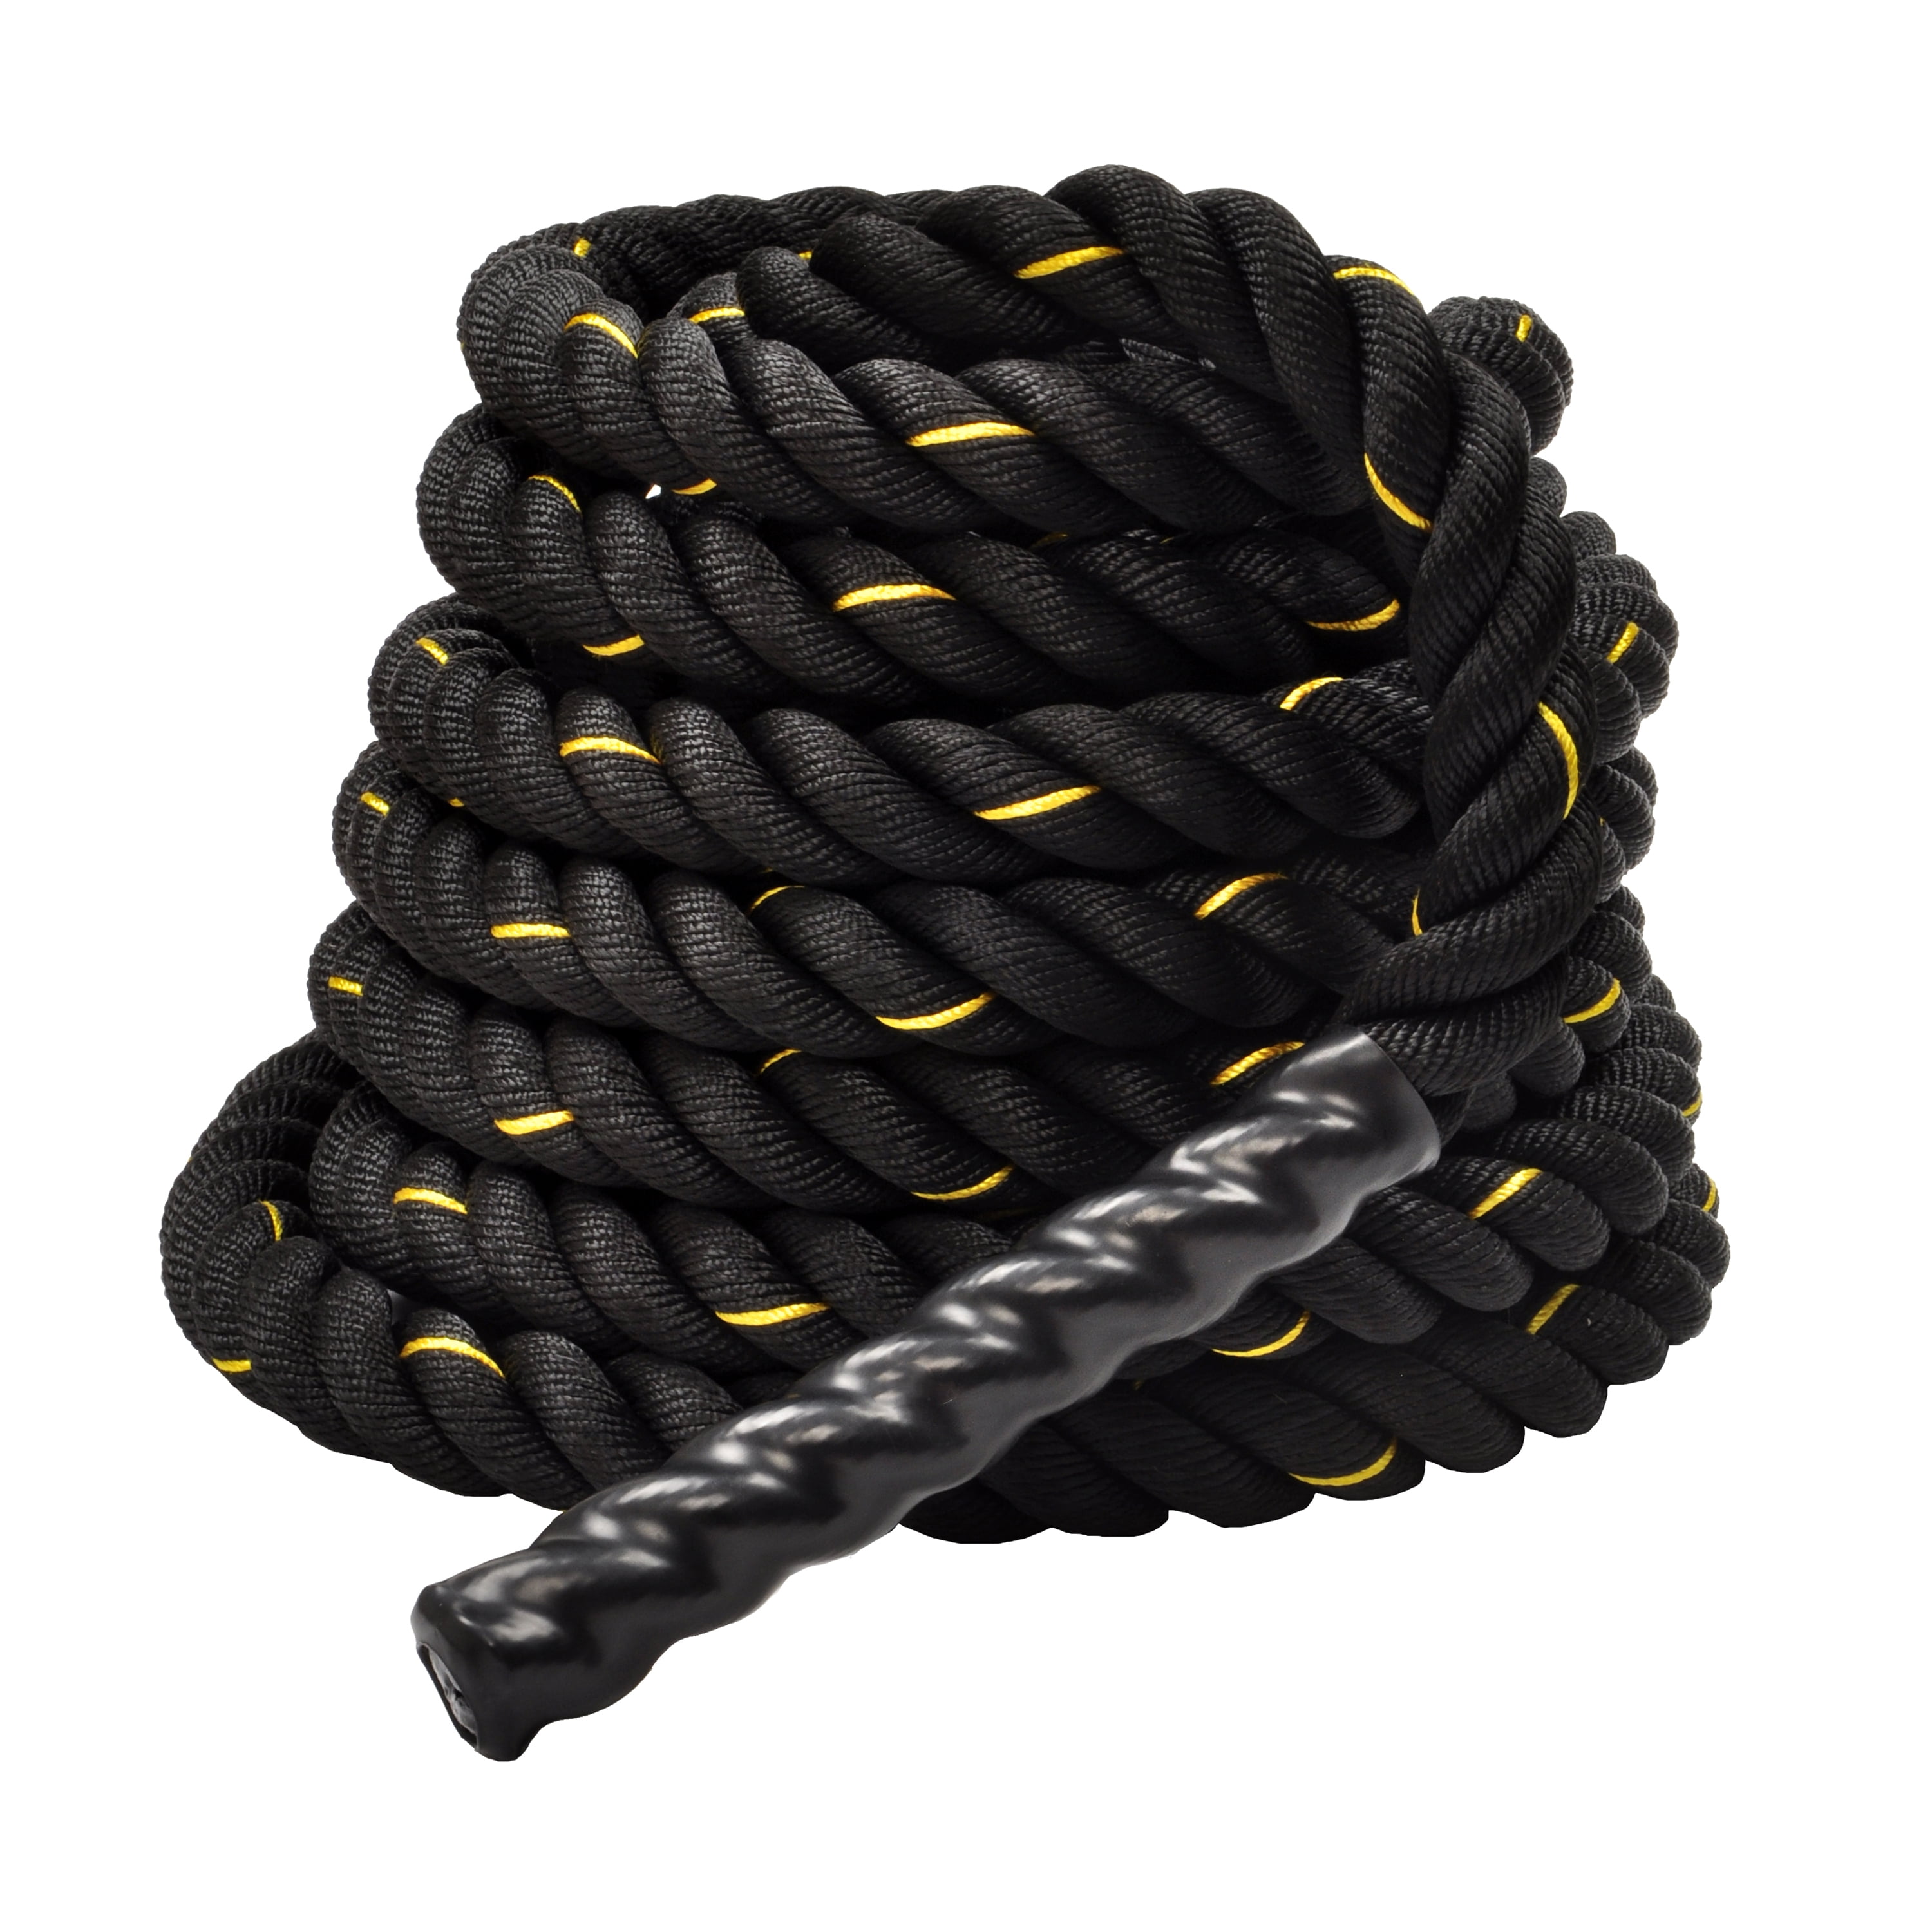 22 FT TRAINING ROPE 17 colours available PROFESSIONALLY MADE 